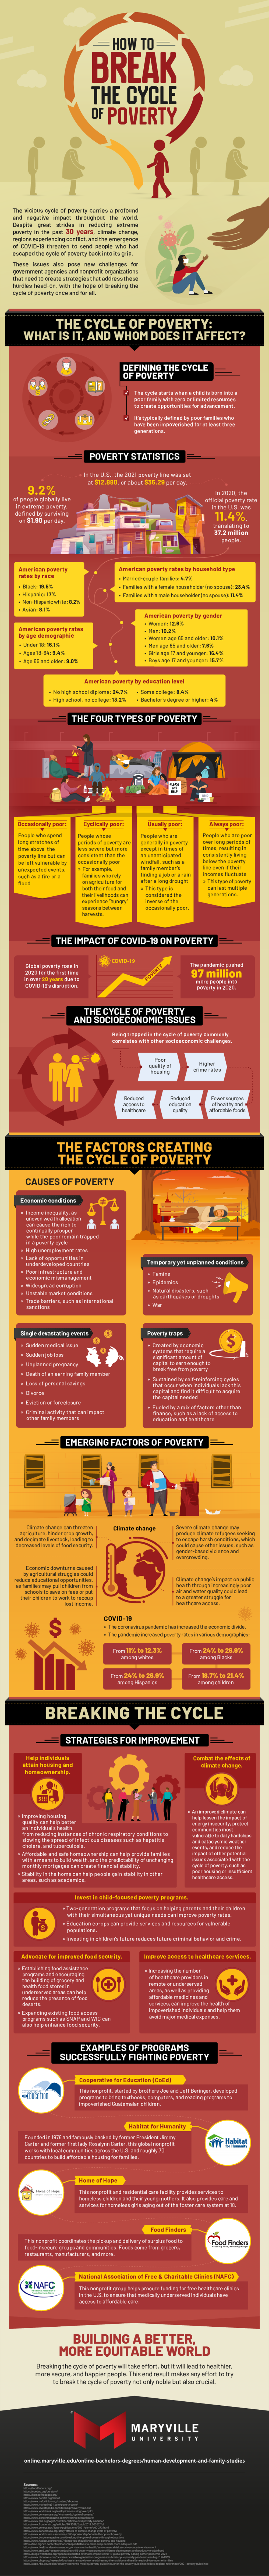 https://online.maryville.edu/wp-content/uploads/sites/97/2022/08/MVU-BAHDFS-2021-Q3-Infographic-How-to-Break-the-Cycle-of-Poverty-Impact-on-Global-Growth.png?w=1000